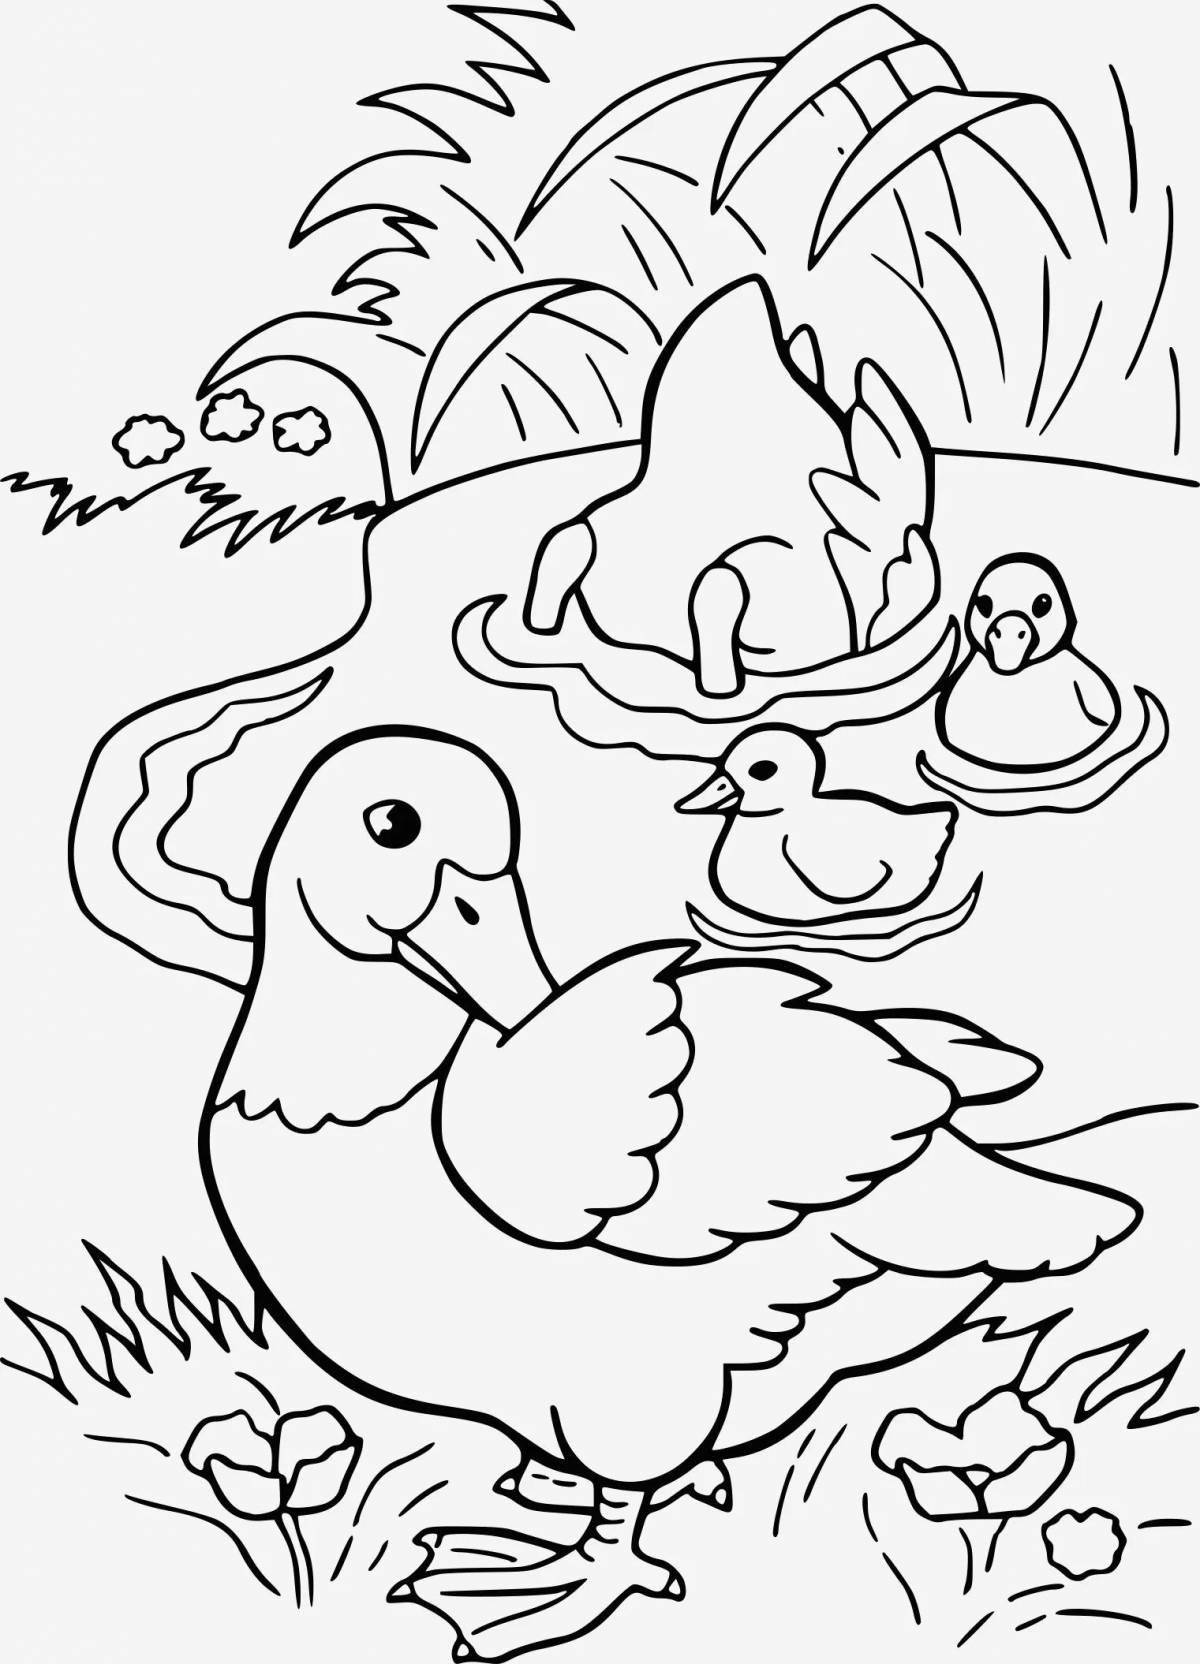 Coloring page sweet bird yard poultry